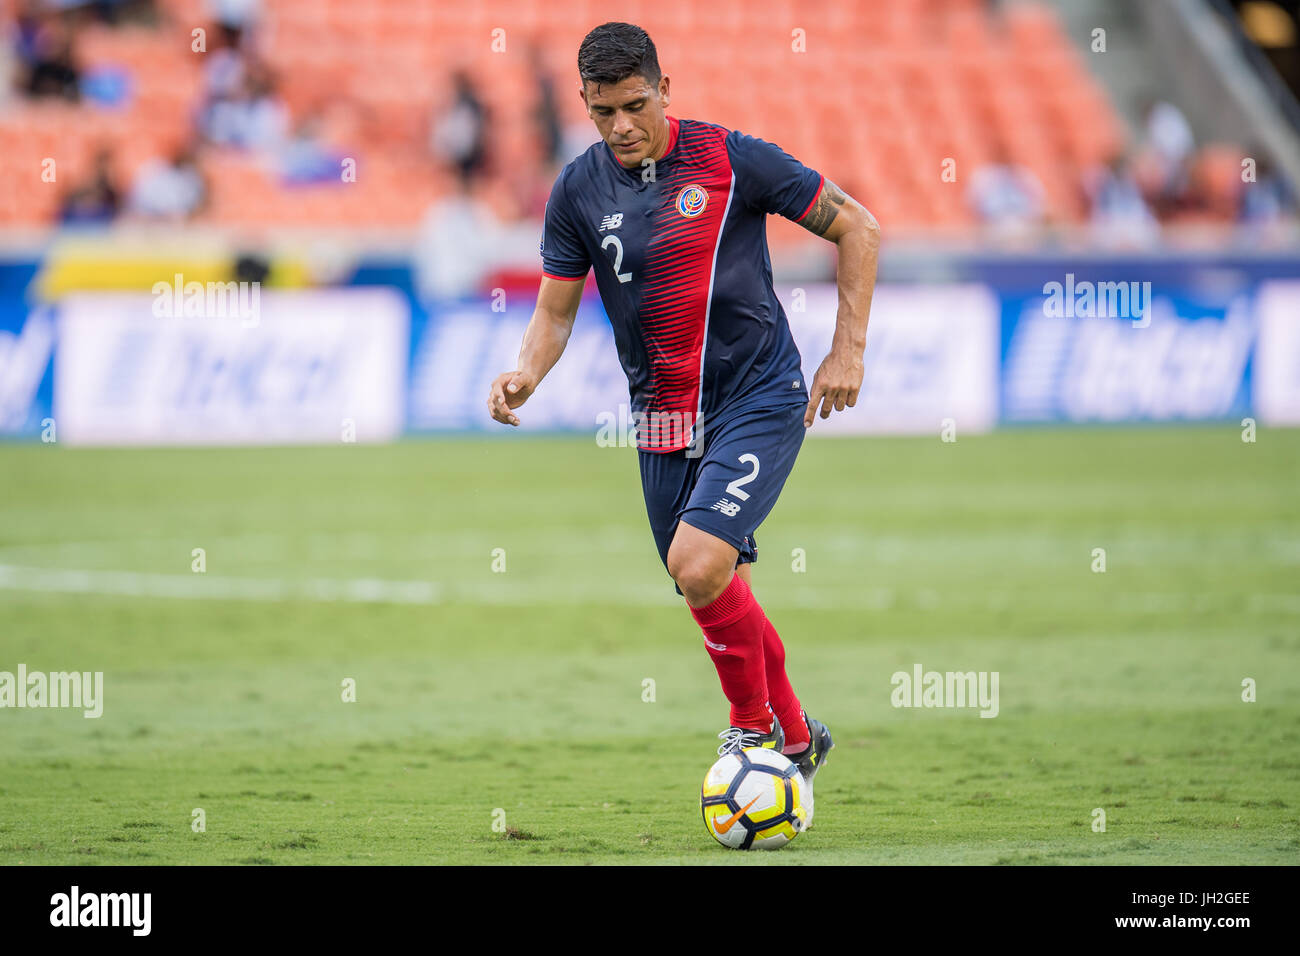 Houston, Texas, USA. 11th July, 2017. Costa Rica defender Johnny Acosta (2) controls the ball during the 1st half of an international CONCACAF Gold Cup soccer match between Canada and Costa Rica at BBVA Compass Stadium in Houston, TX on July 11th, 2017. The game ended in a 1-1 draw. Credit: Trask Smith/ZUMA Wire/Alamy Live News Stock Photo